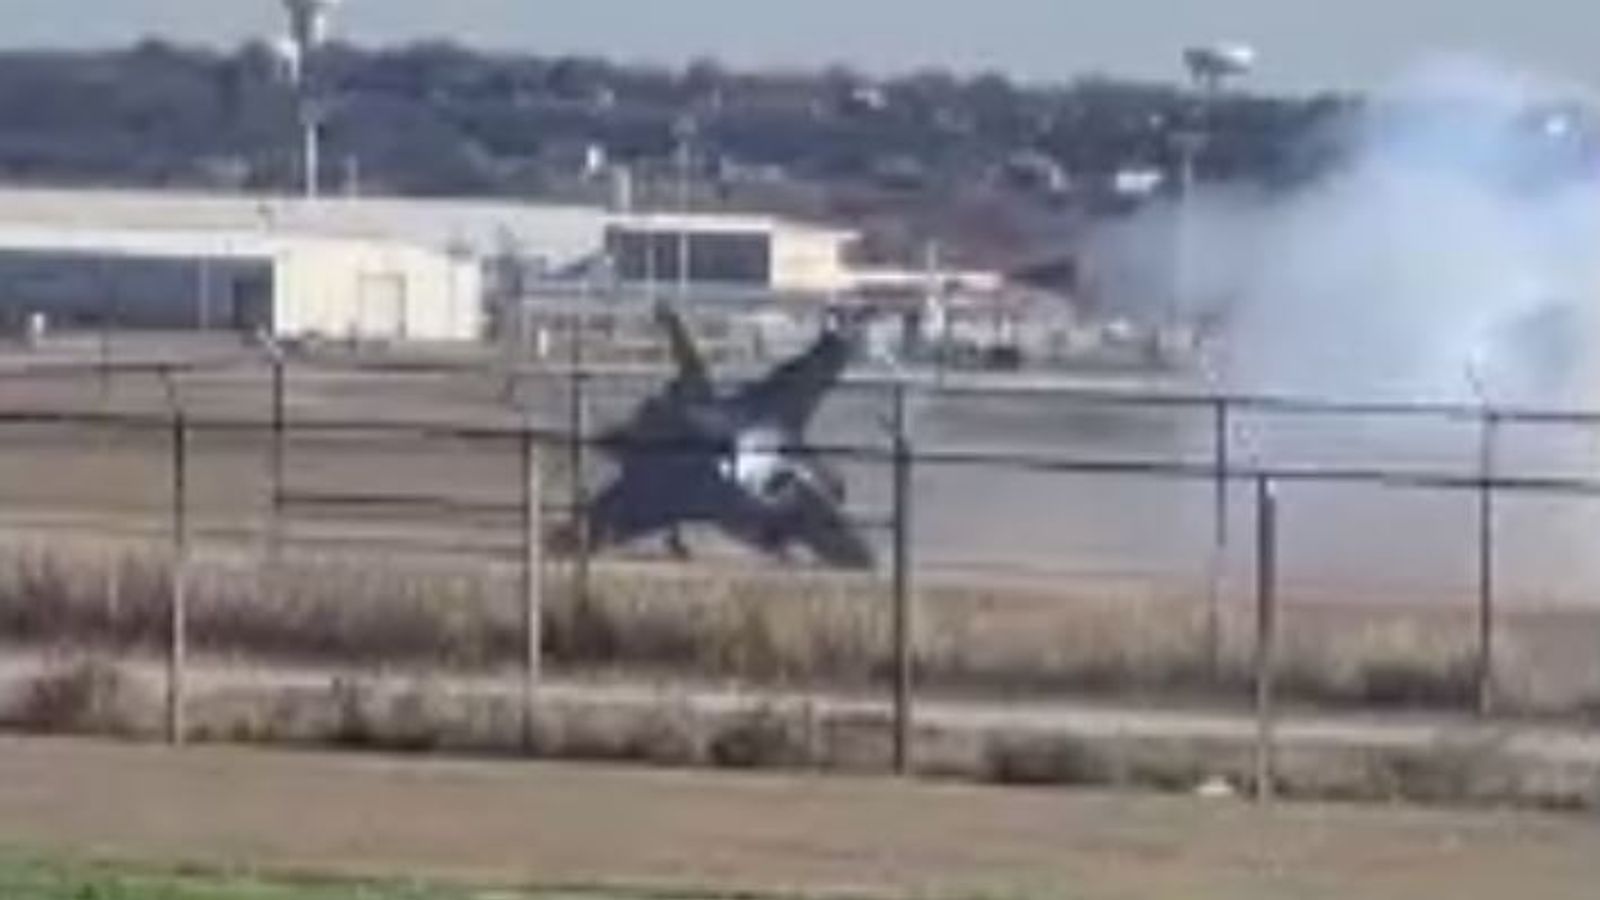 Failed landing sees pilot eject as military jet nosedives onto runway in Texas | US News